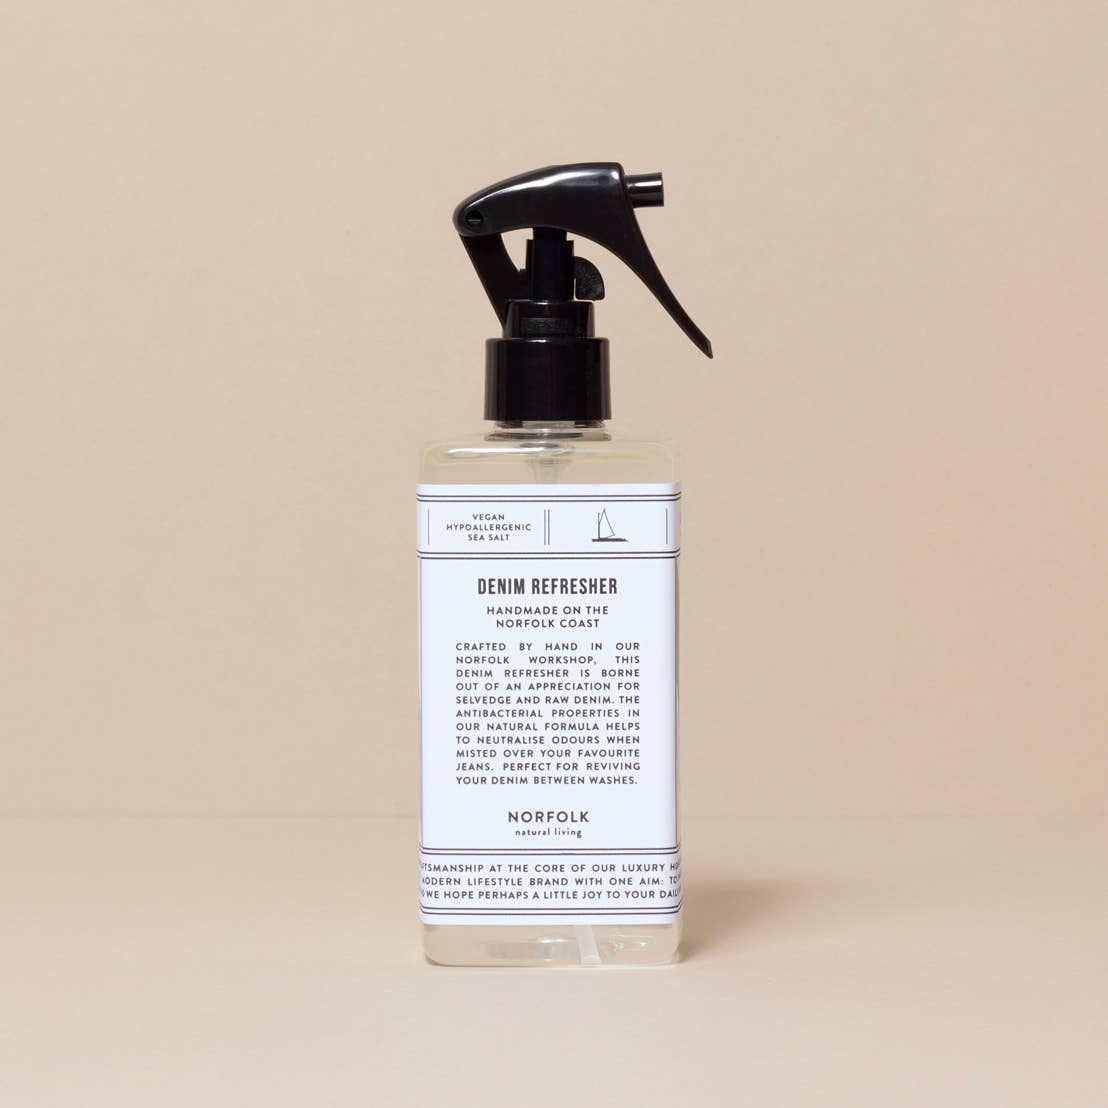 A spray bottle labeled "Norfolk Natural Living Coastal Denim Refresher" against a neutral beige background. The label features care instructions and branding details in a simple, elegant font.